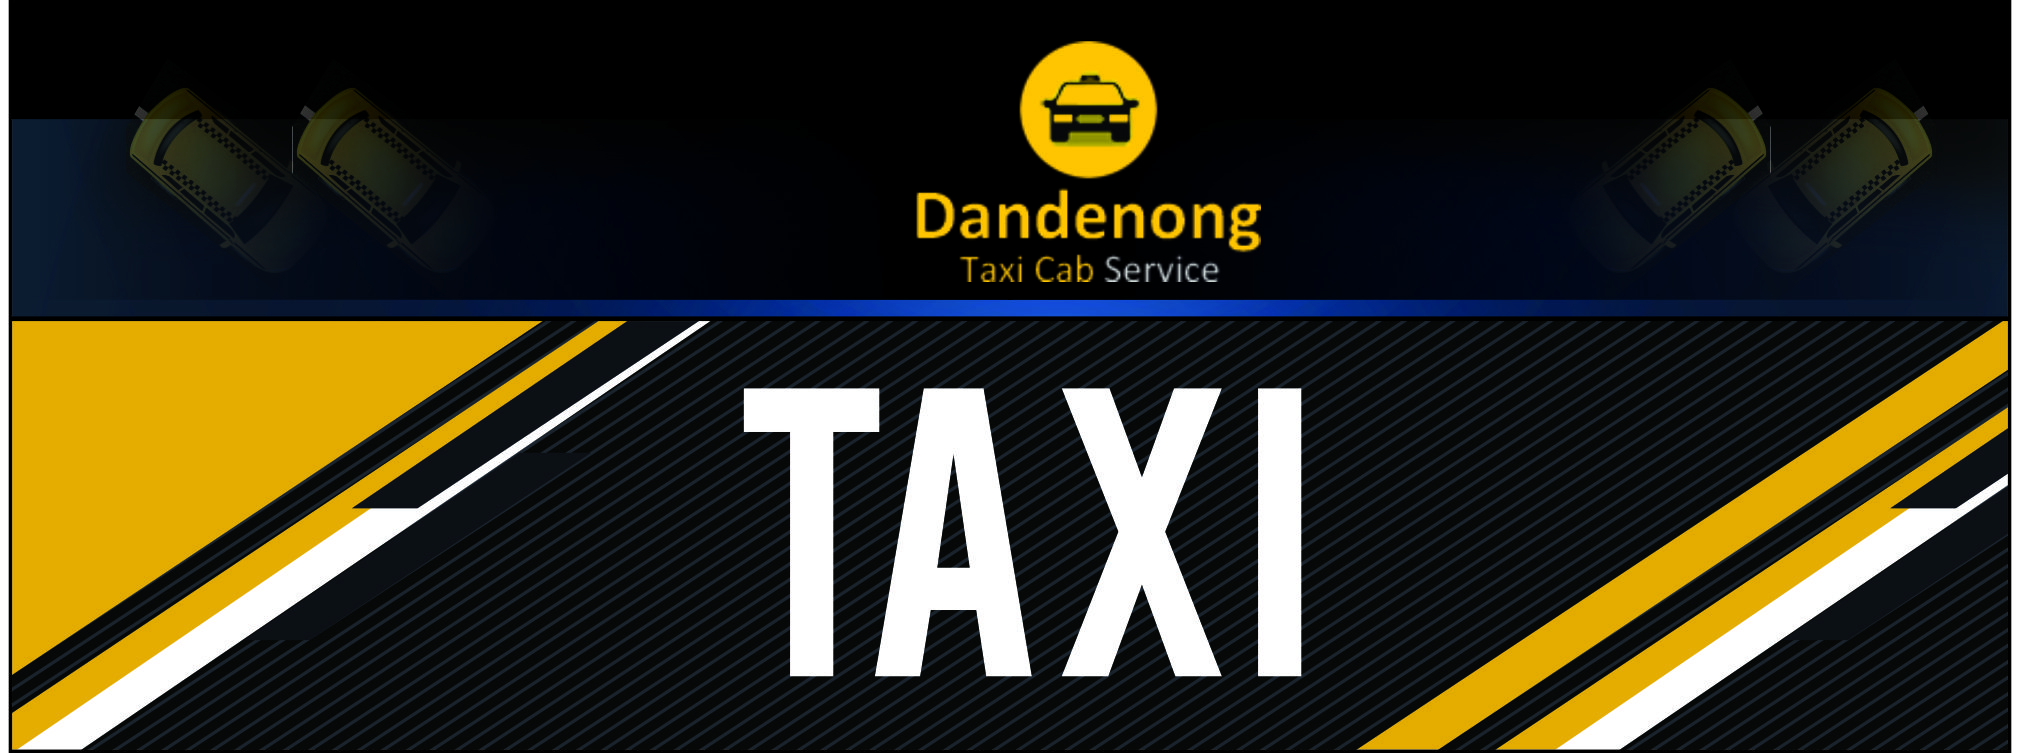 How to get from Melbourne airport to Dandenong?